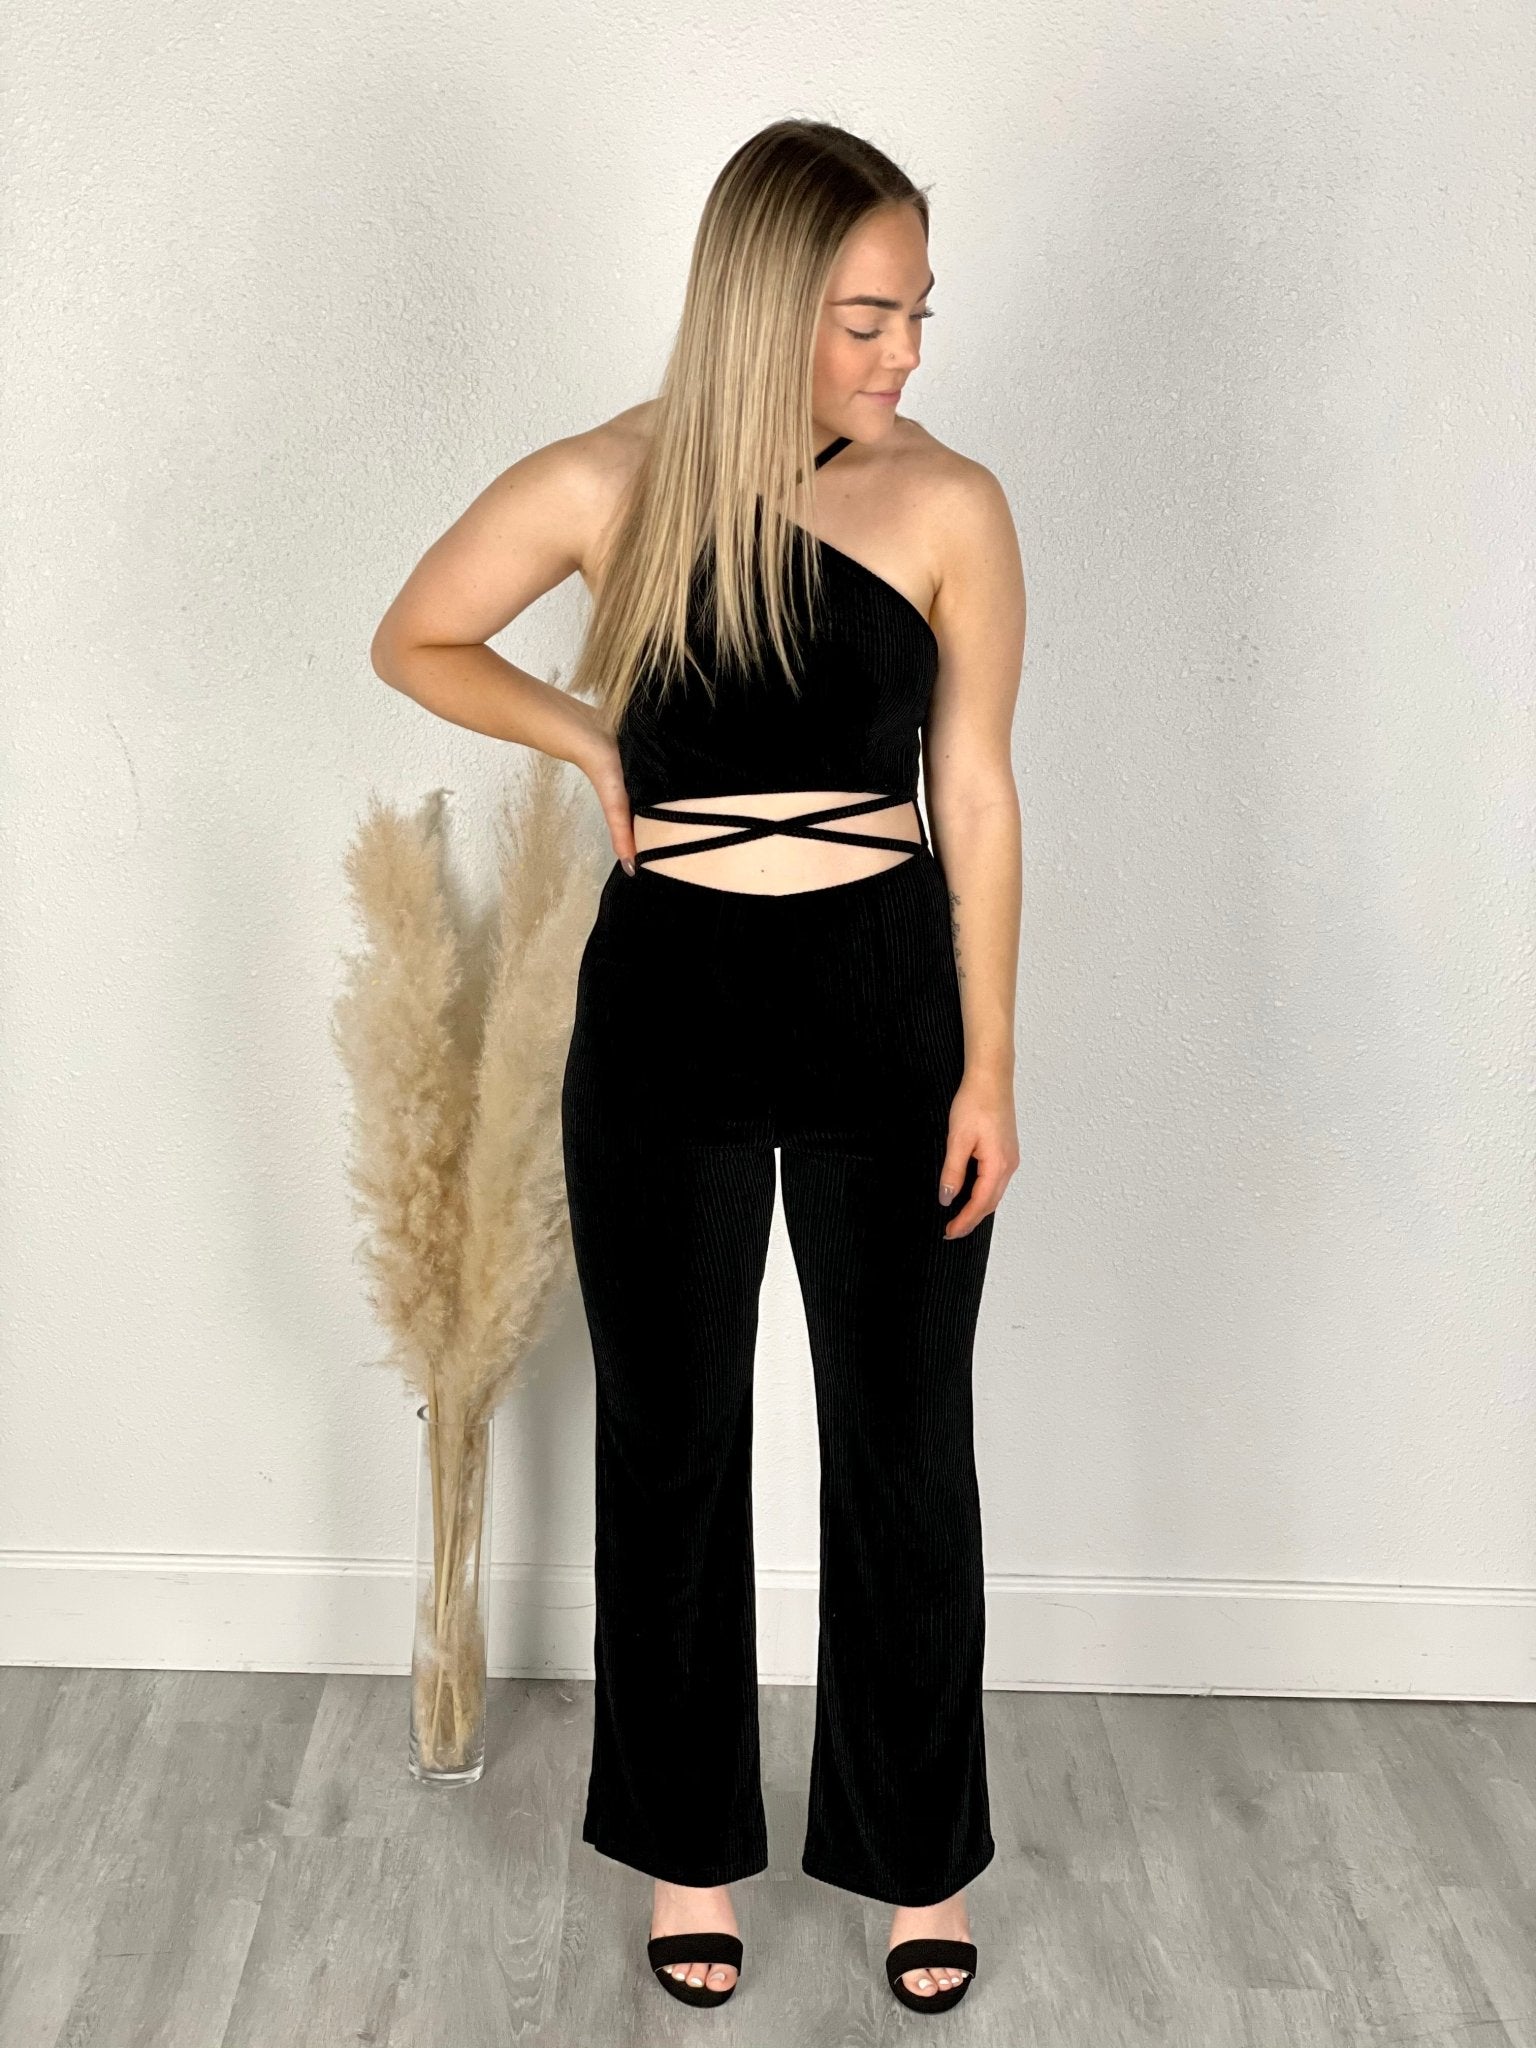 Ribbed velvet jumpsuit black - Cute jumpsuit - Trendy Rompers and Pantsuits at Lush Fashion Lounge Boutique in Oklahoma City